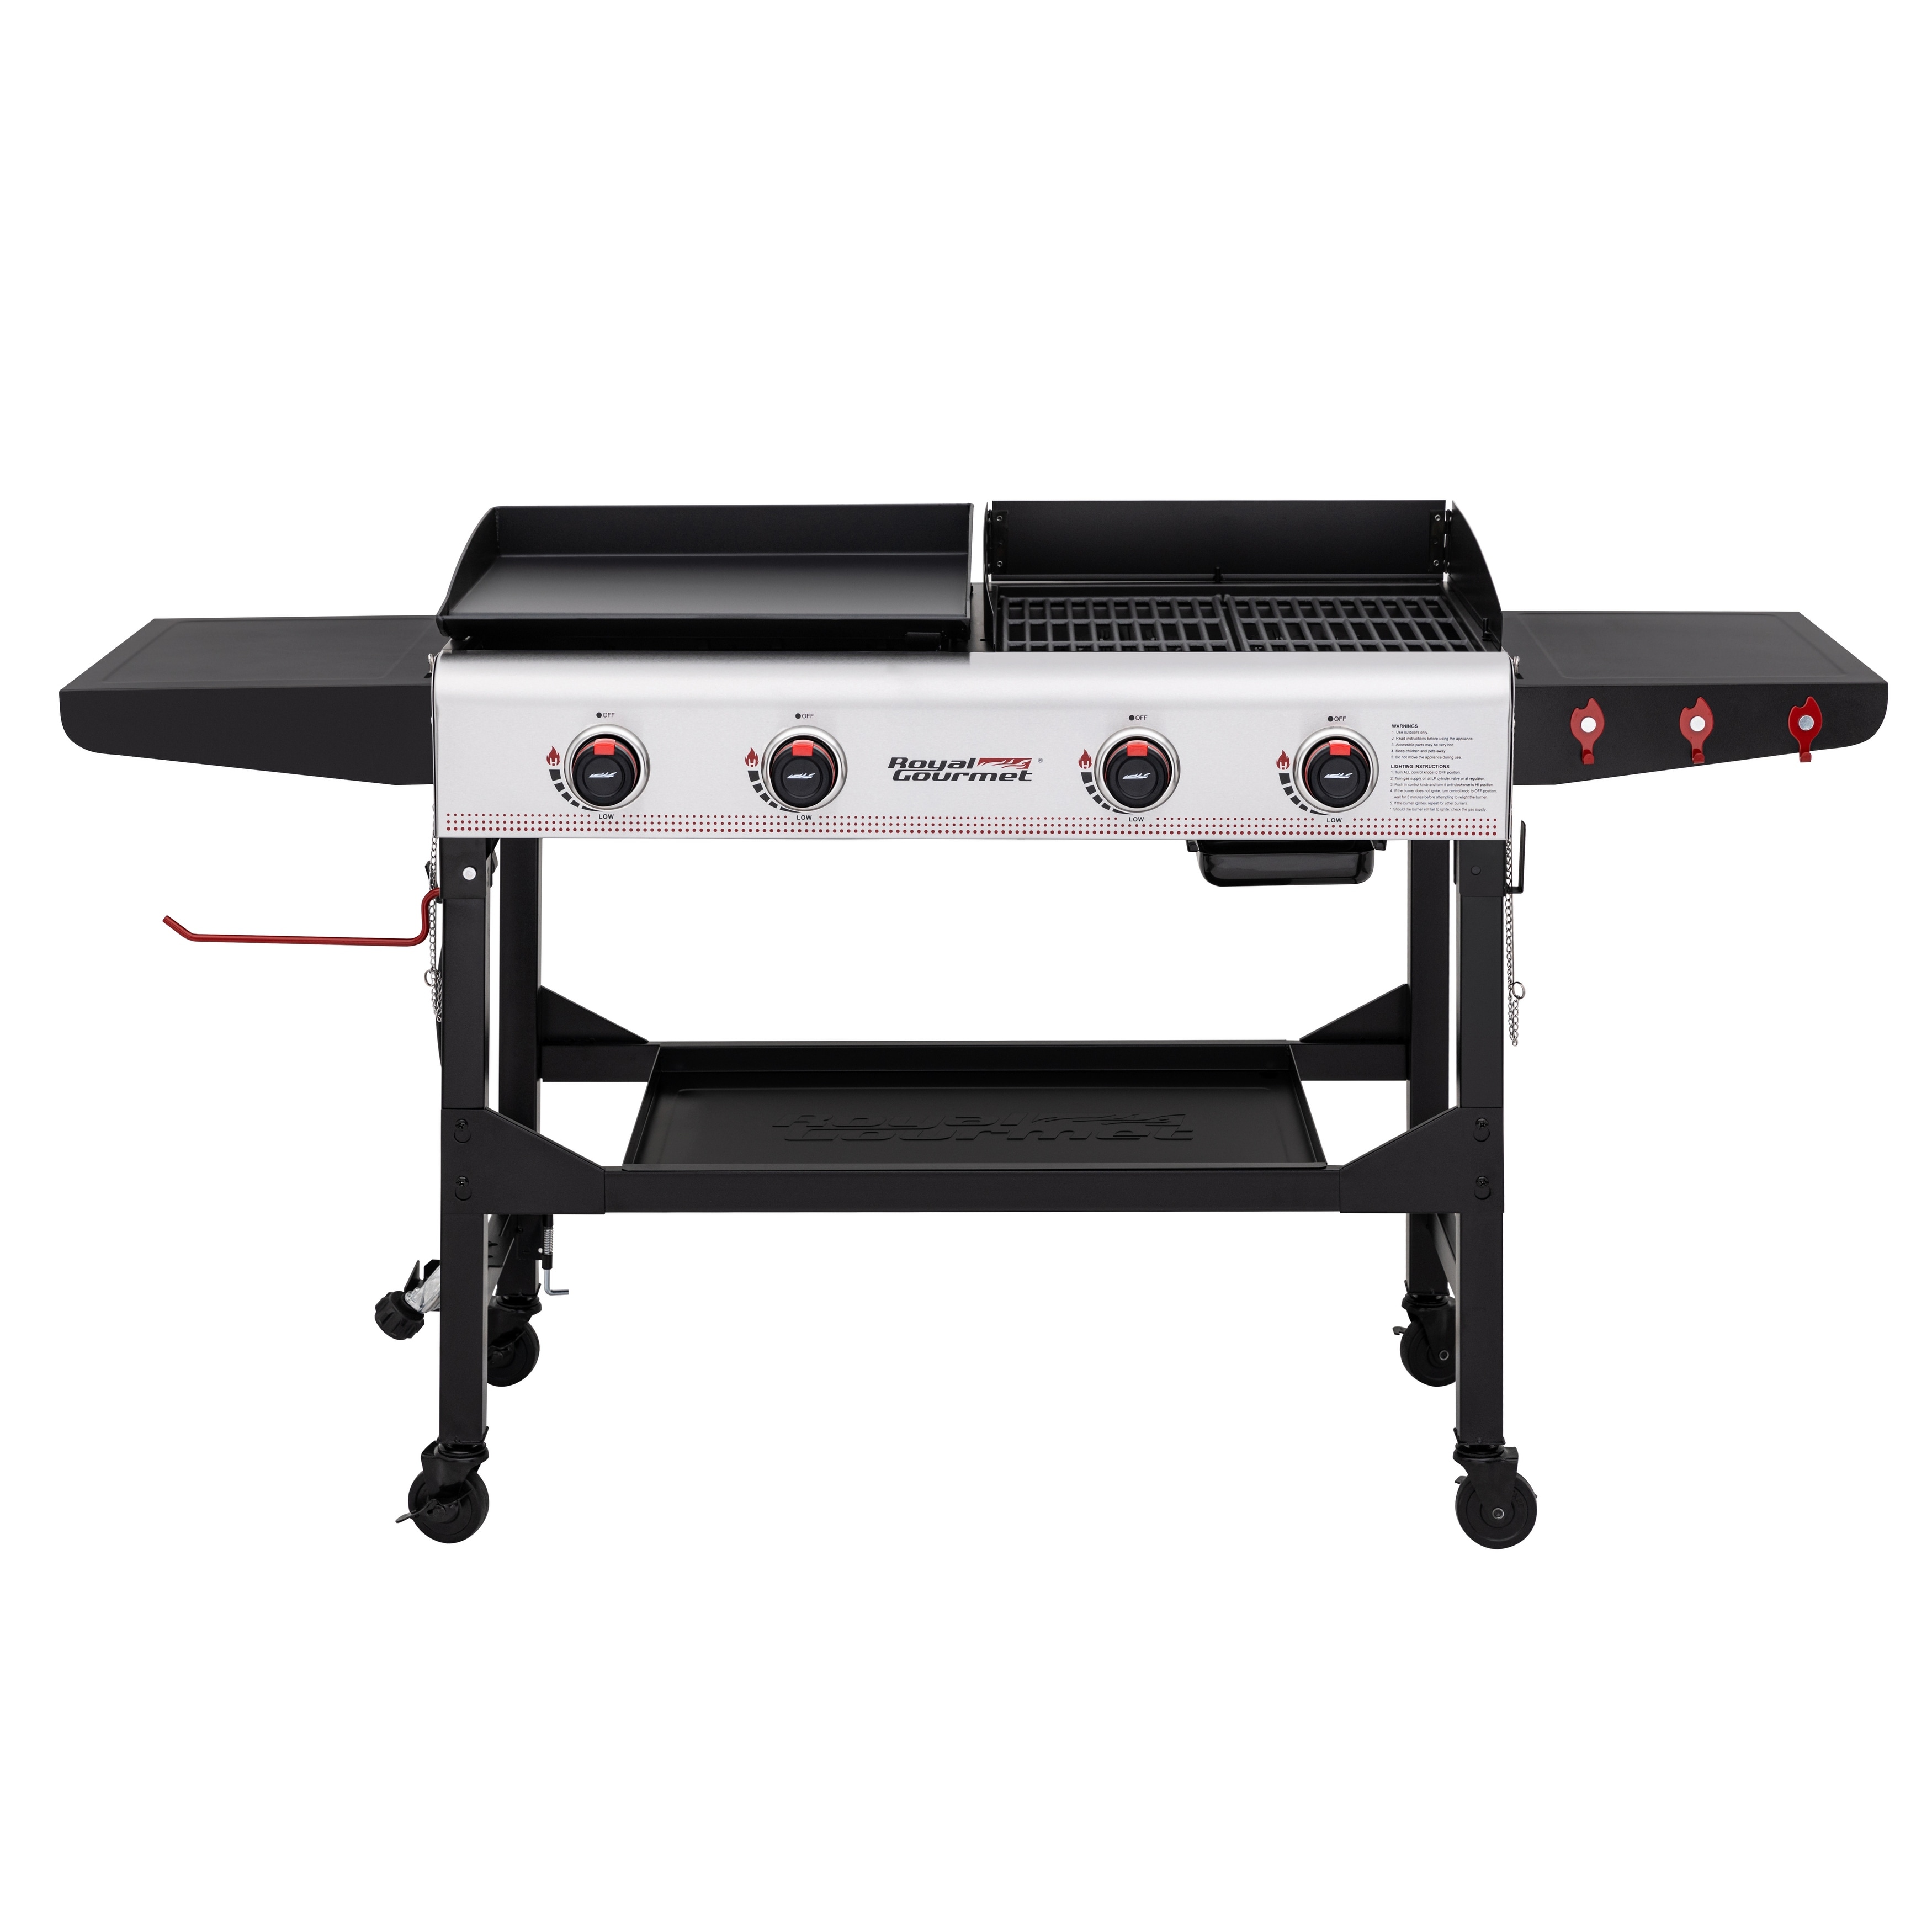 Royal Gourmet 4-burner Portable Flat Top Gas Grill And Griddle Combo Grill With Folding Legs  48 000 Btu  Black and Silver